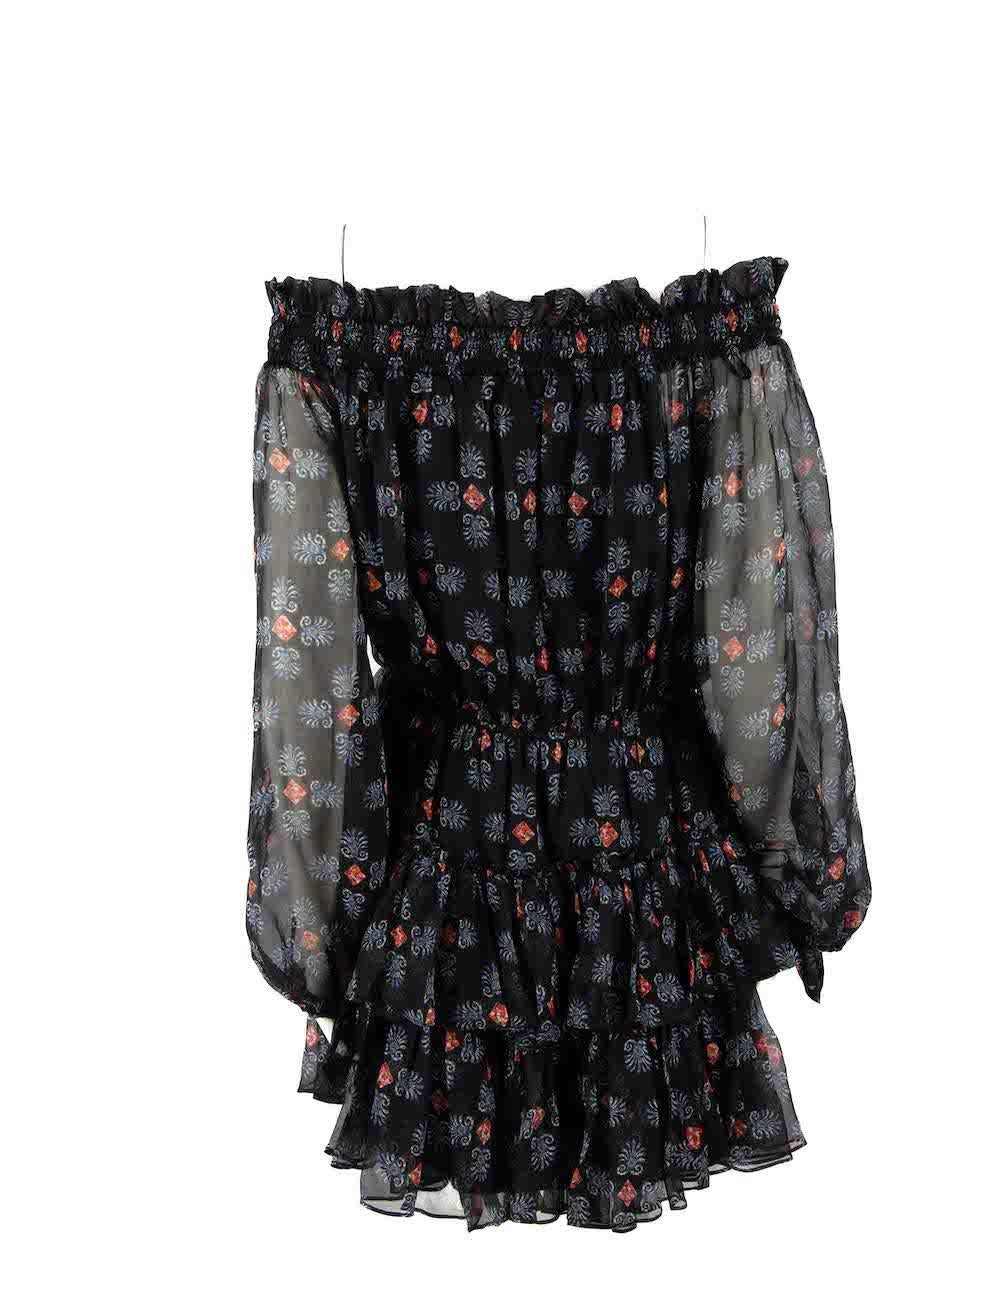 Caroline Constas Black Silk Ruffle Abstract Dress Size M In Good Condition For Sale In London, GB